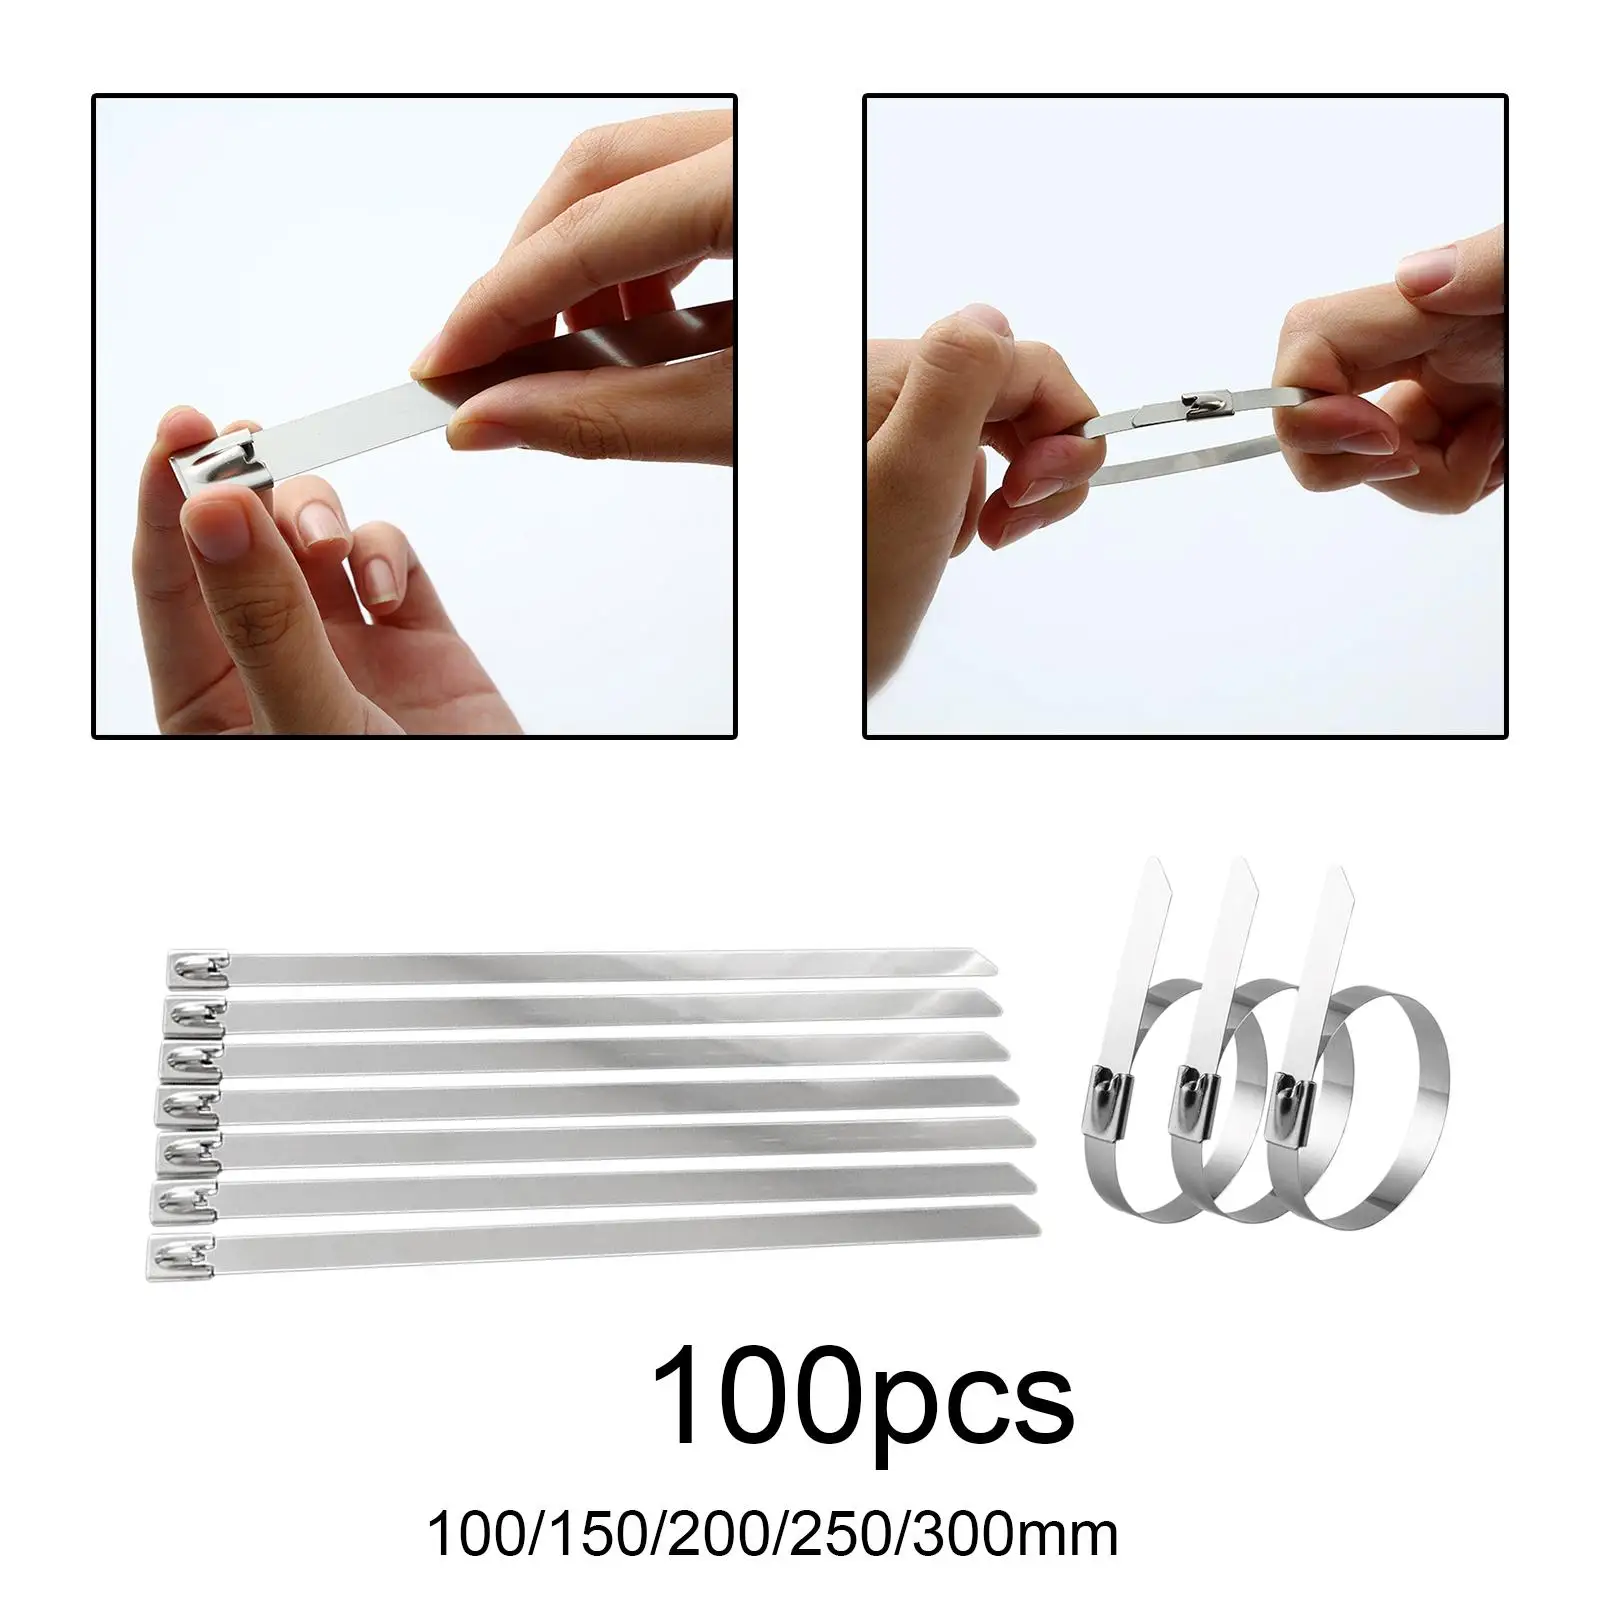 100 Pieces Stainless Steel Cable Tie Portable Multifunction Rustproof Reusable for School Computer Hunting Household Accessories